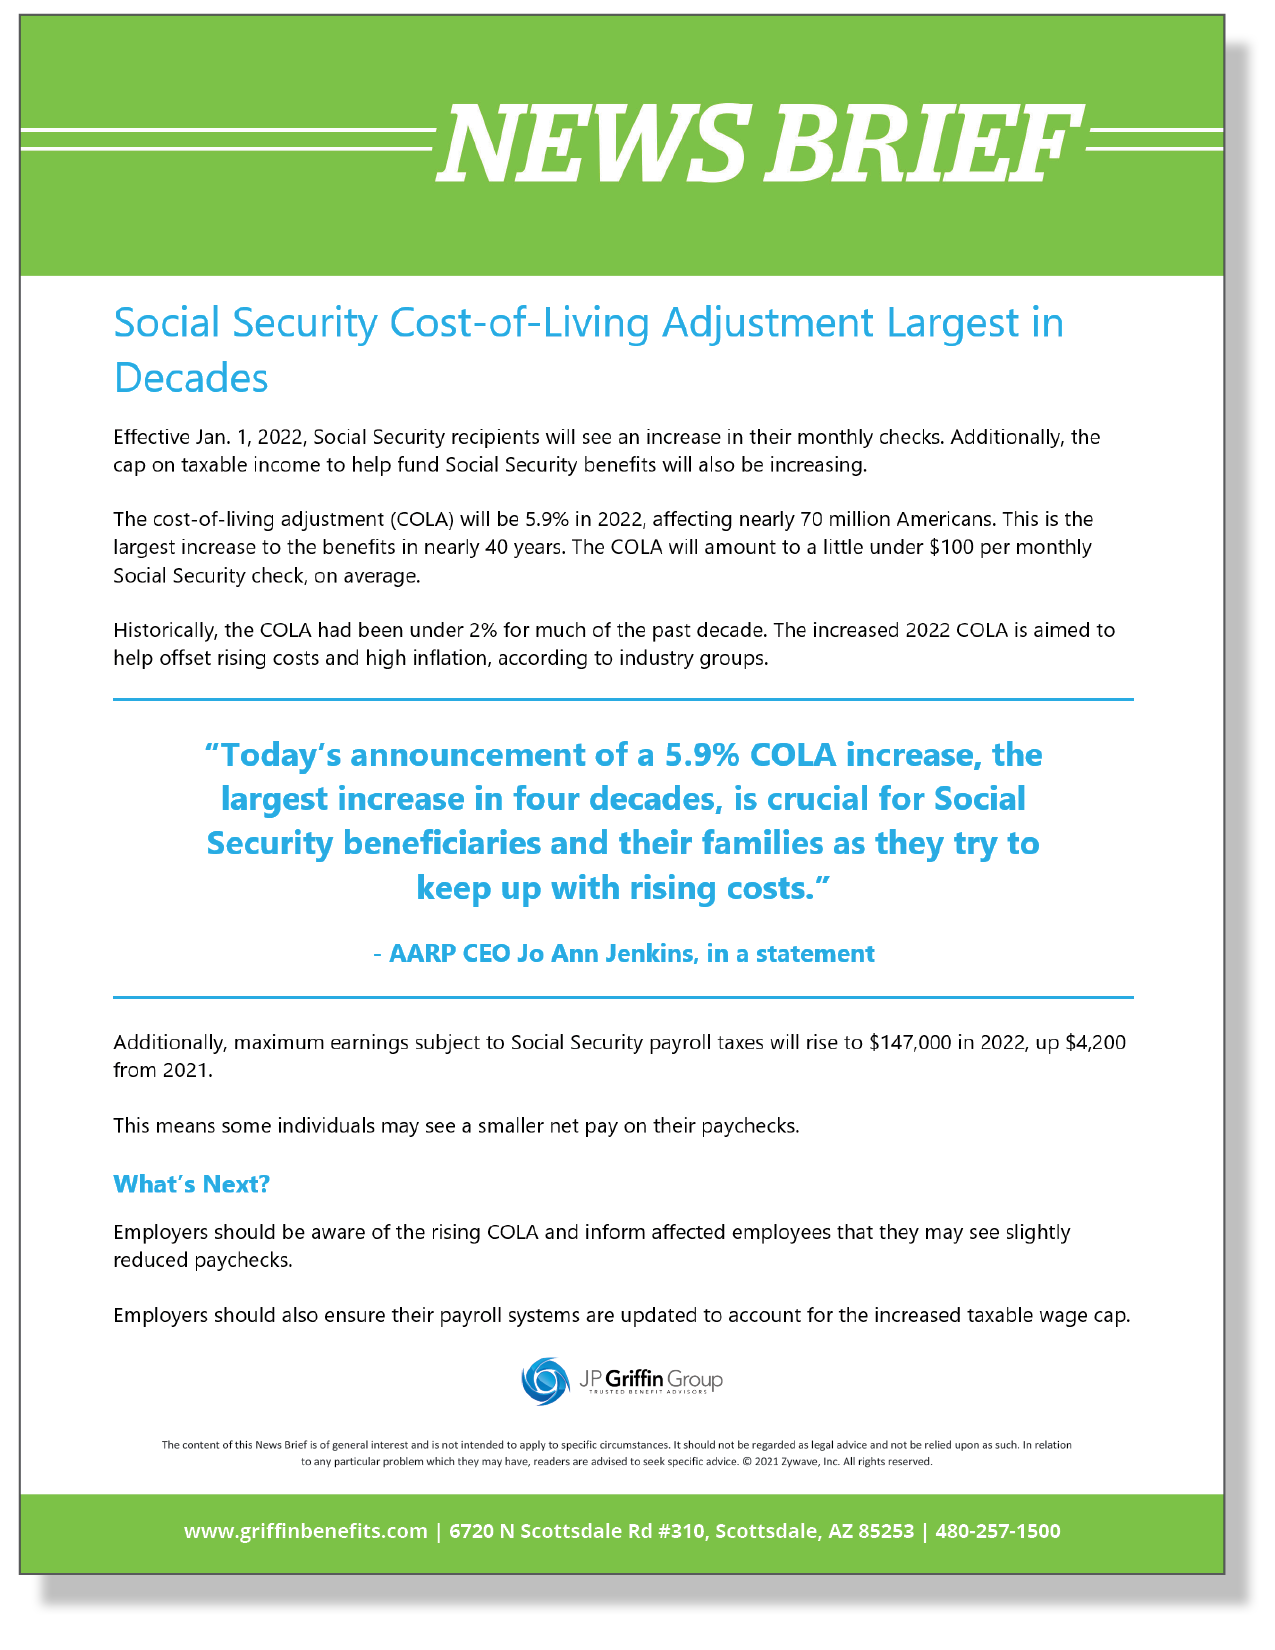 Social Security Cost-of-Living Adjustment Largest in Decades